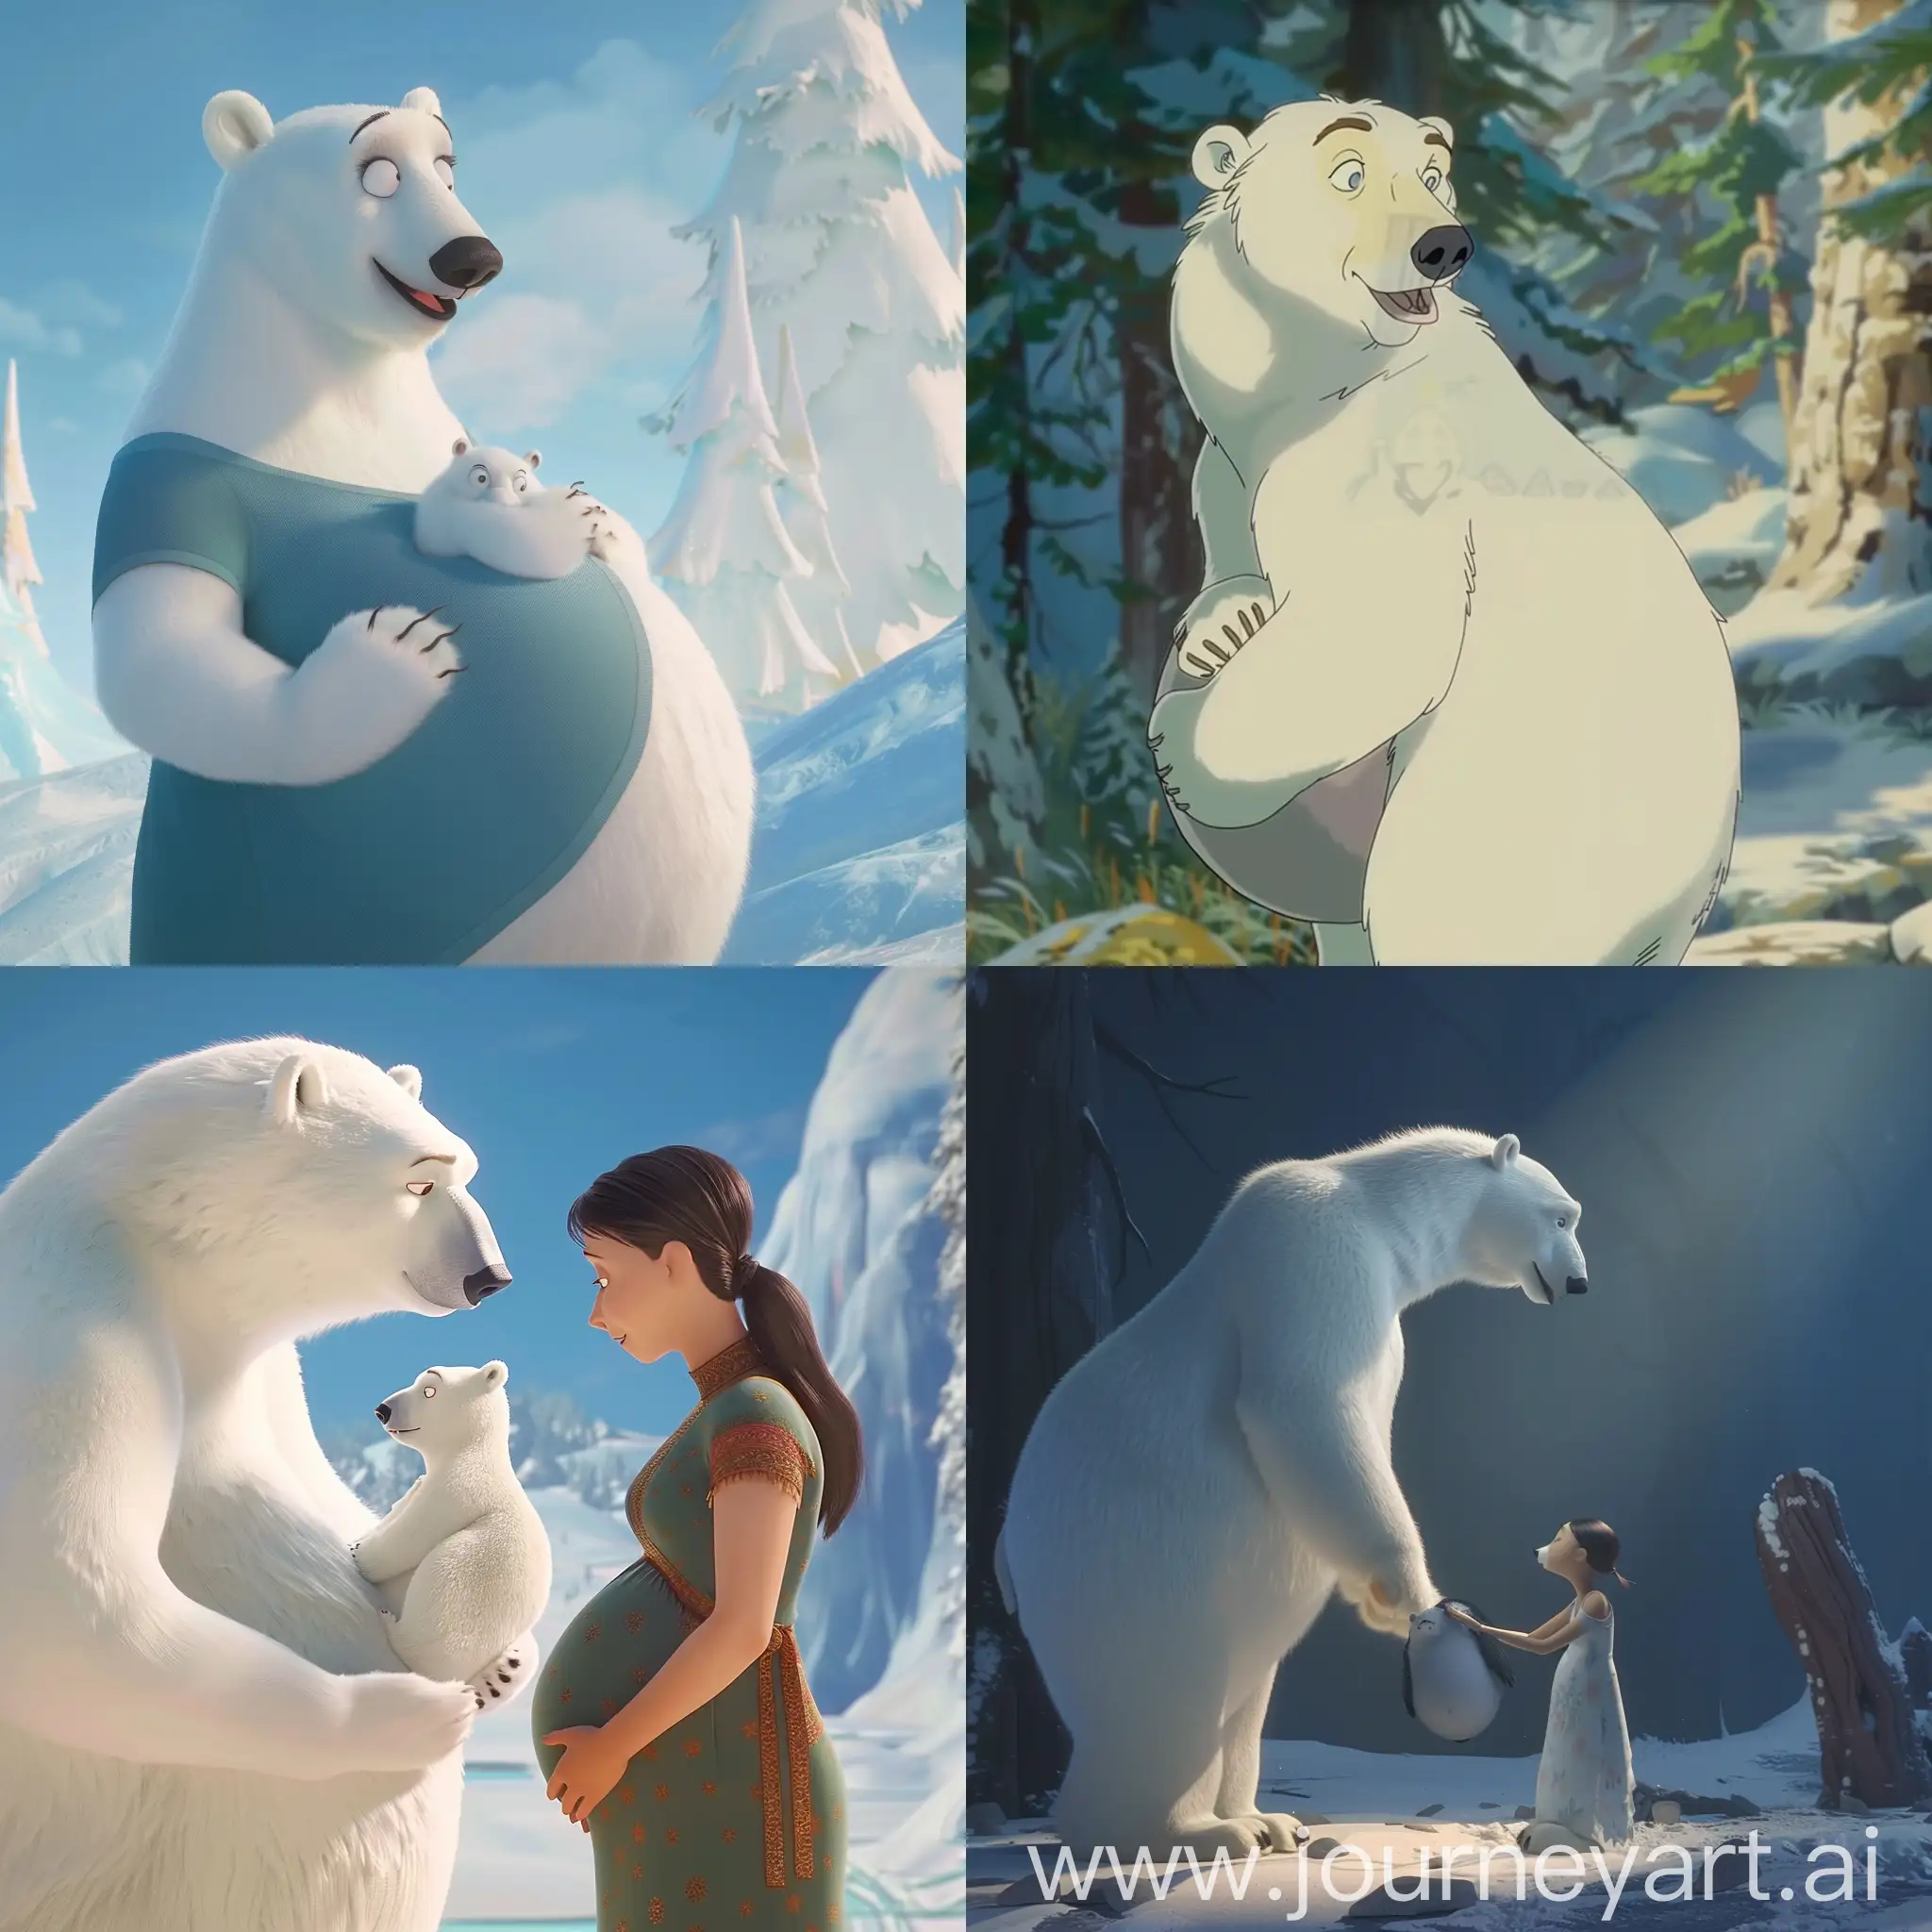 scene from an animated film featuring a pregnant polar bear woman